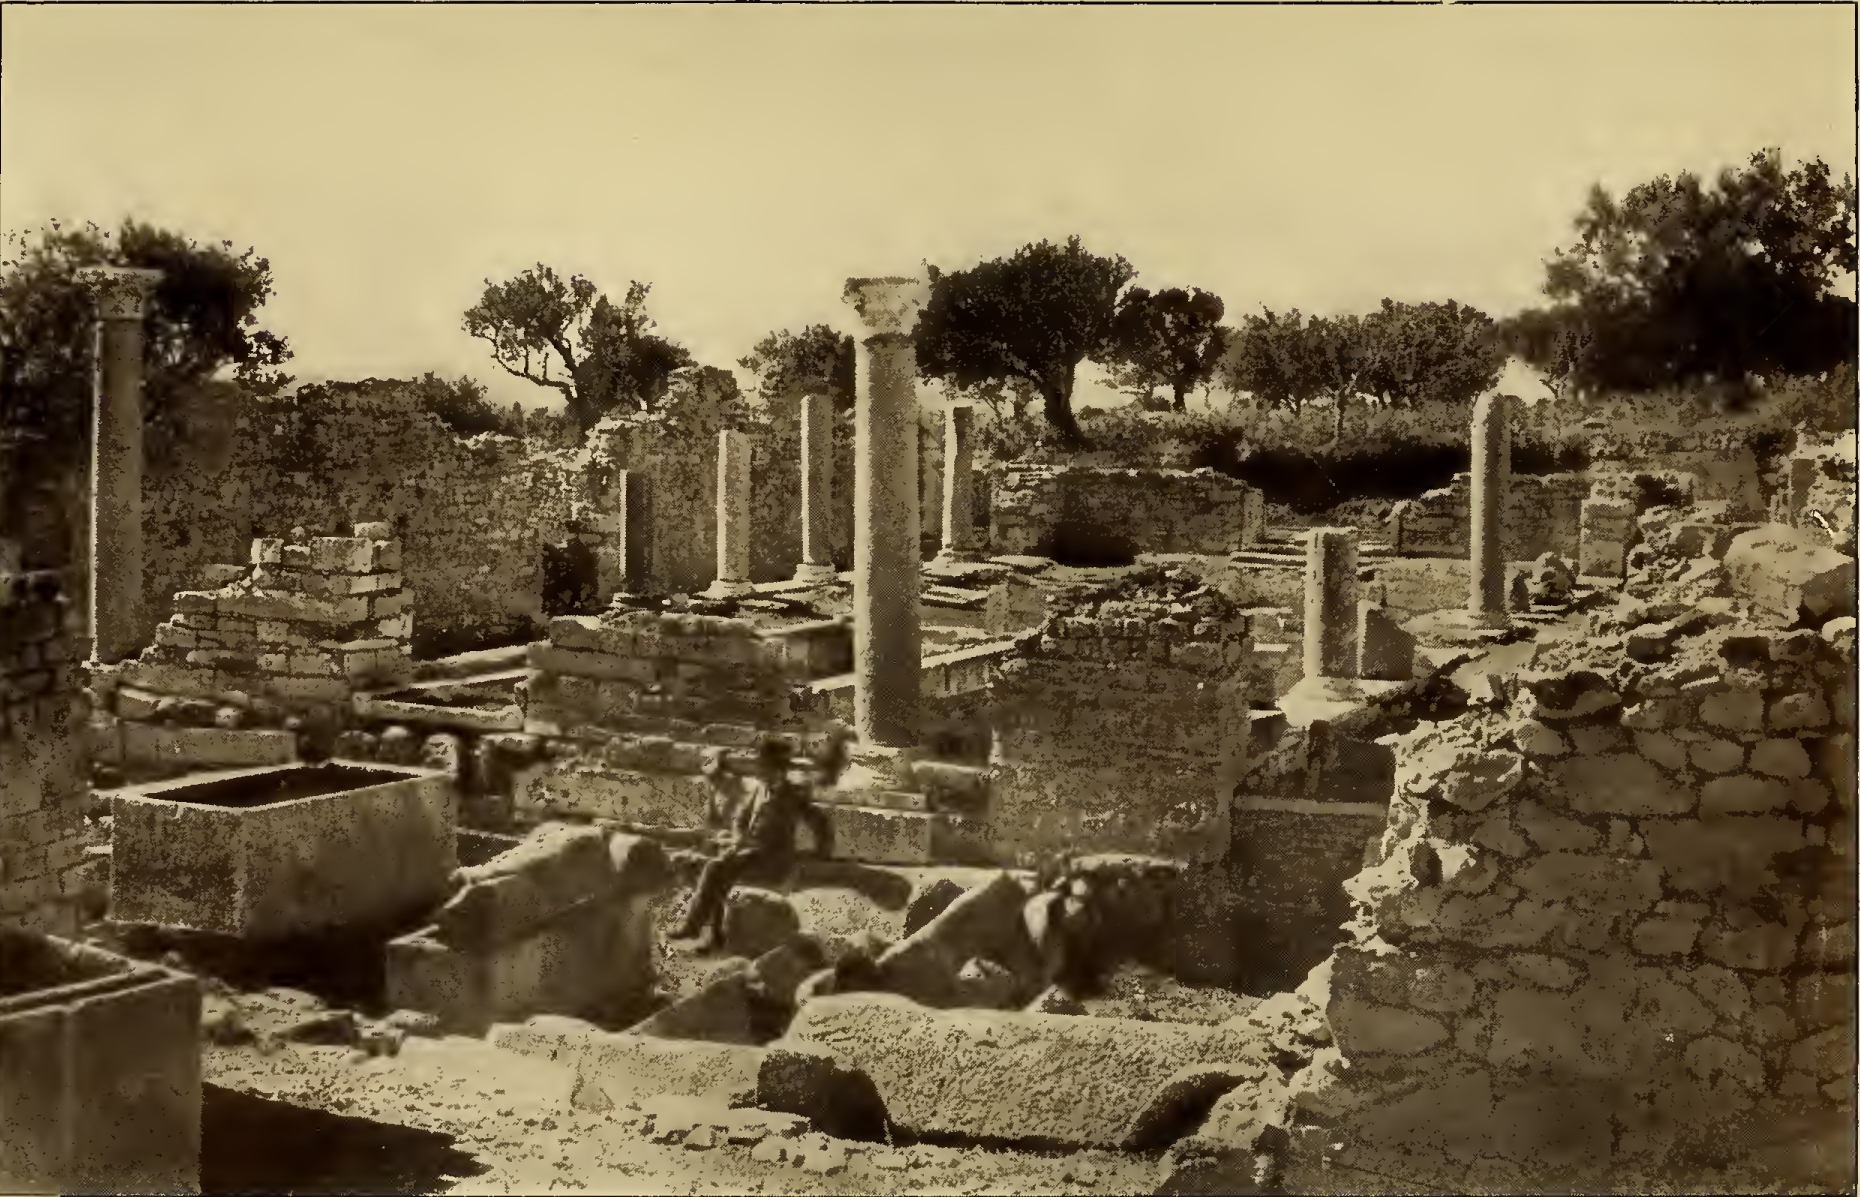 Stone ruins with some standing columns. Caption: Salona Ruins of the Ancient Basilica.